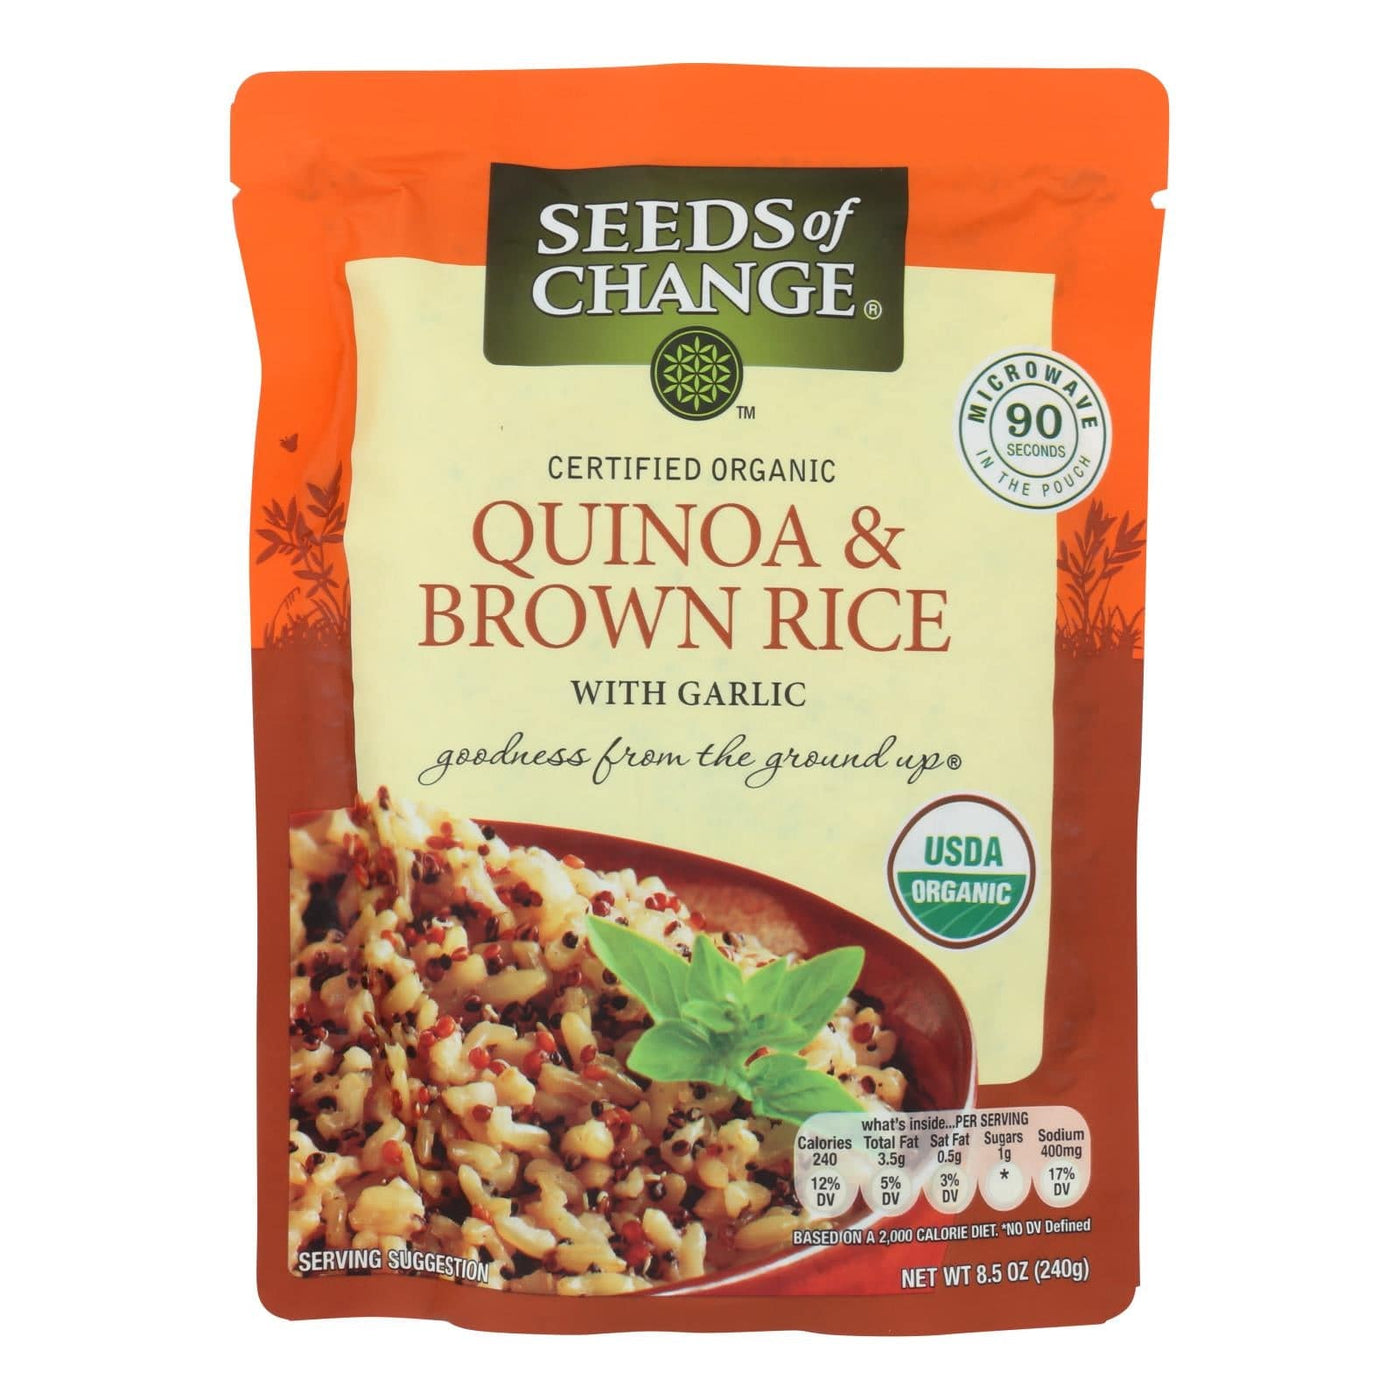 Buy Seeds Of Change Organic Quinoa And Brown Rice With Garlic - Case Of 12 - 8.5 Oz.  at OnlyNaturals.us